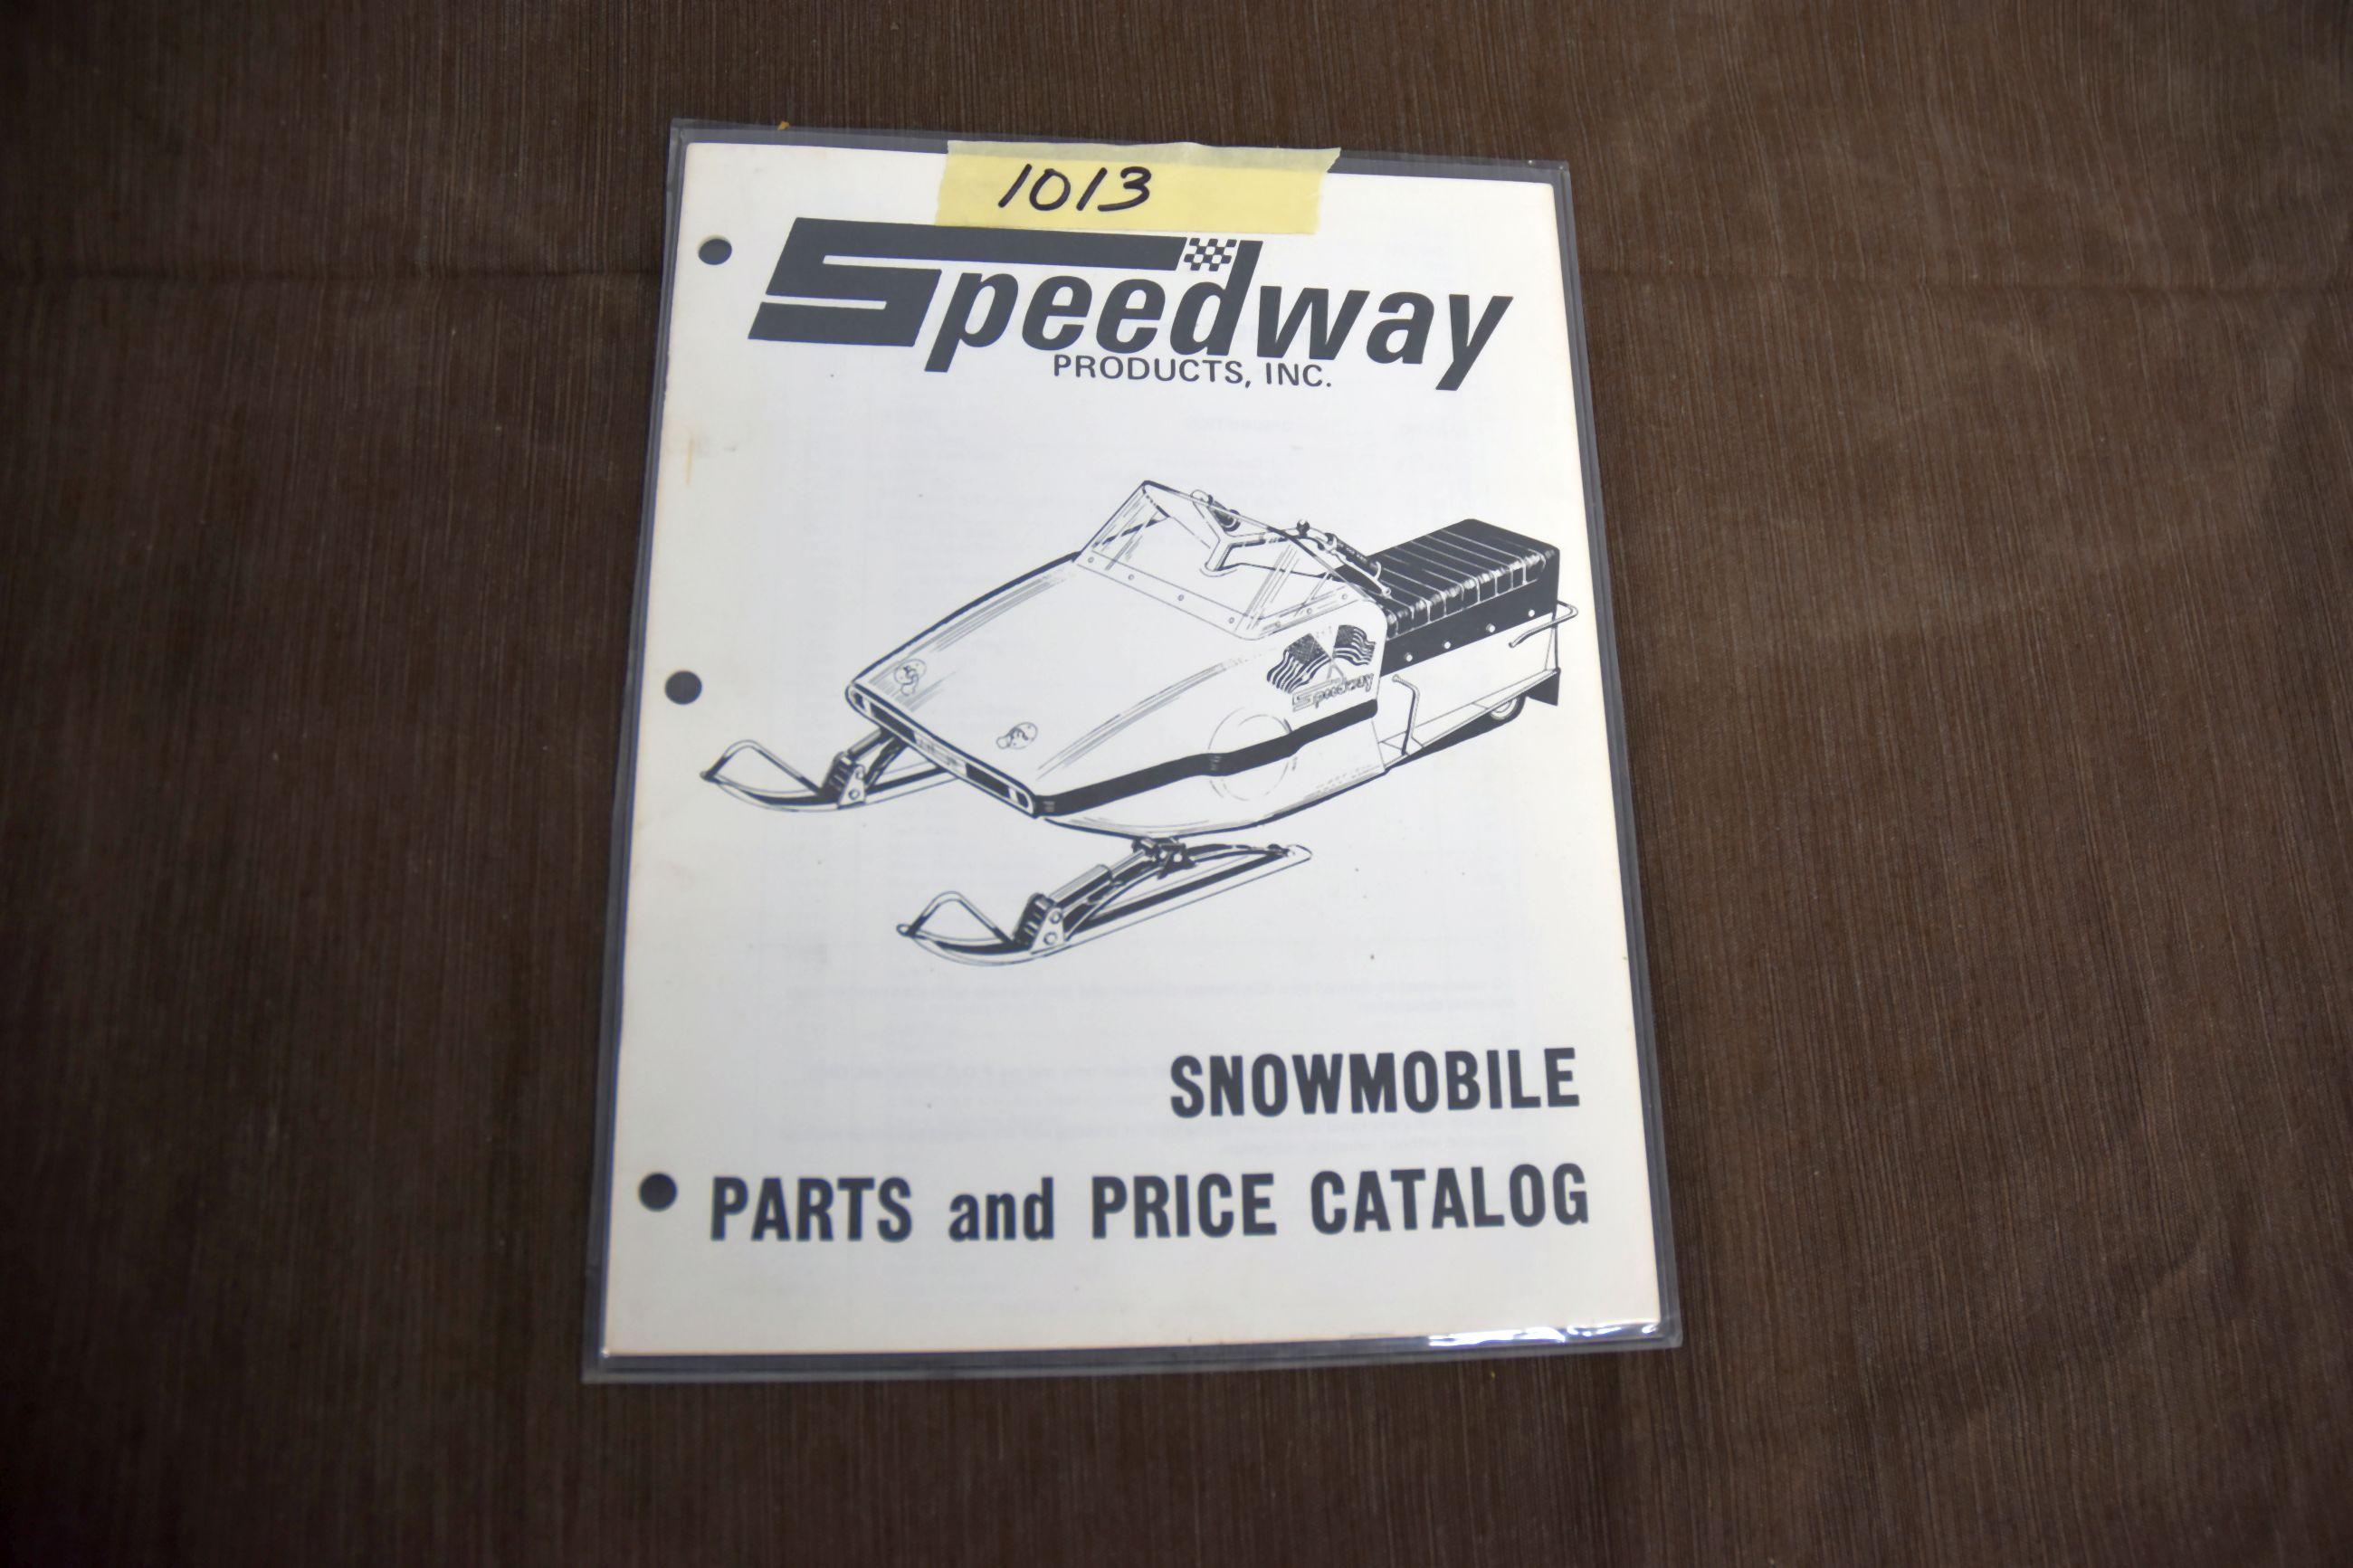 Original Speedway Snowmobile Parts and Price Catalog